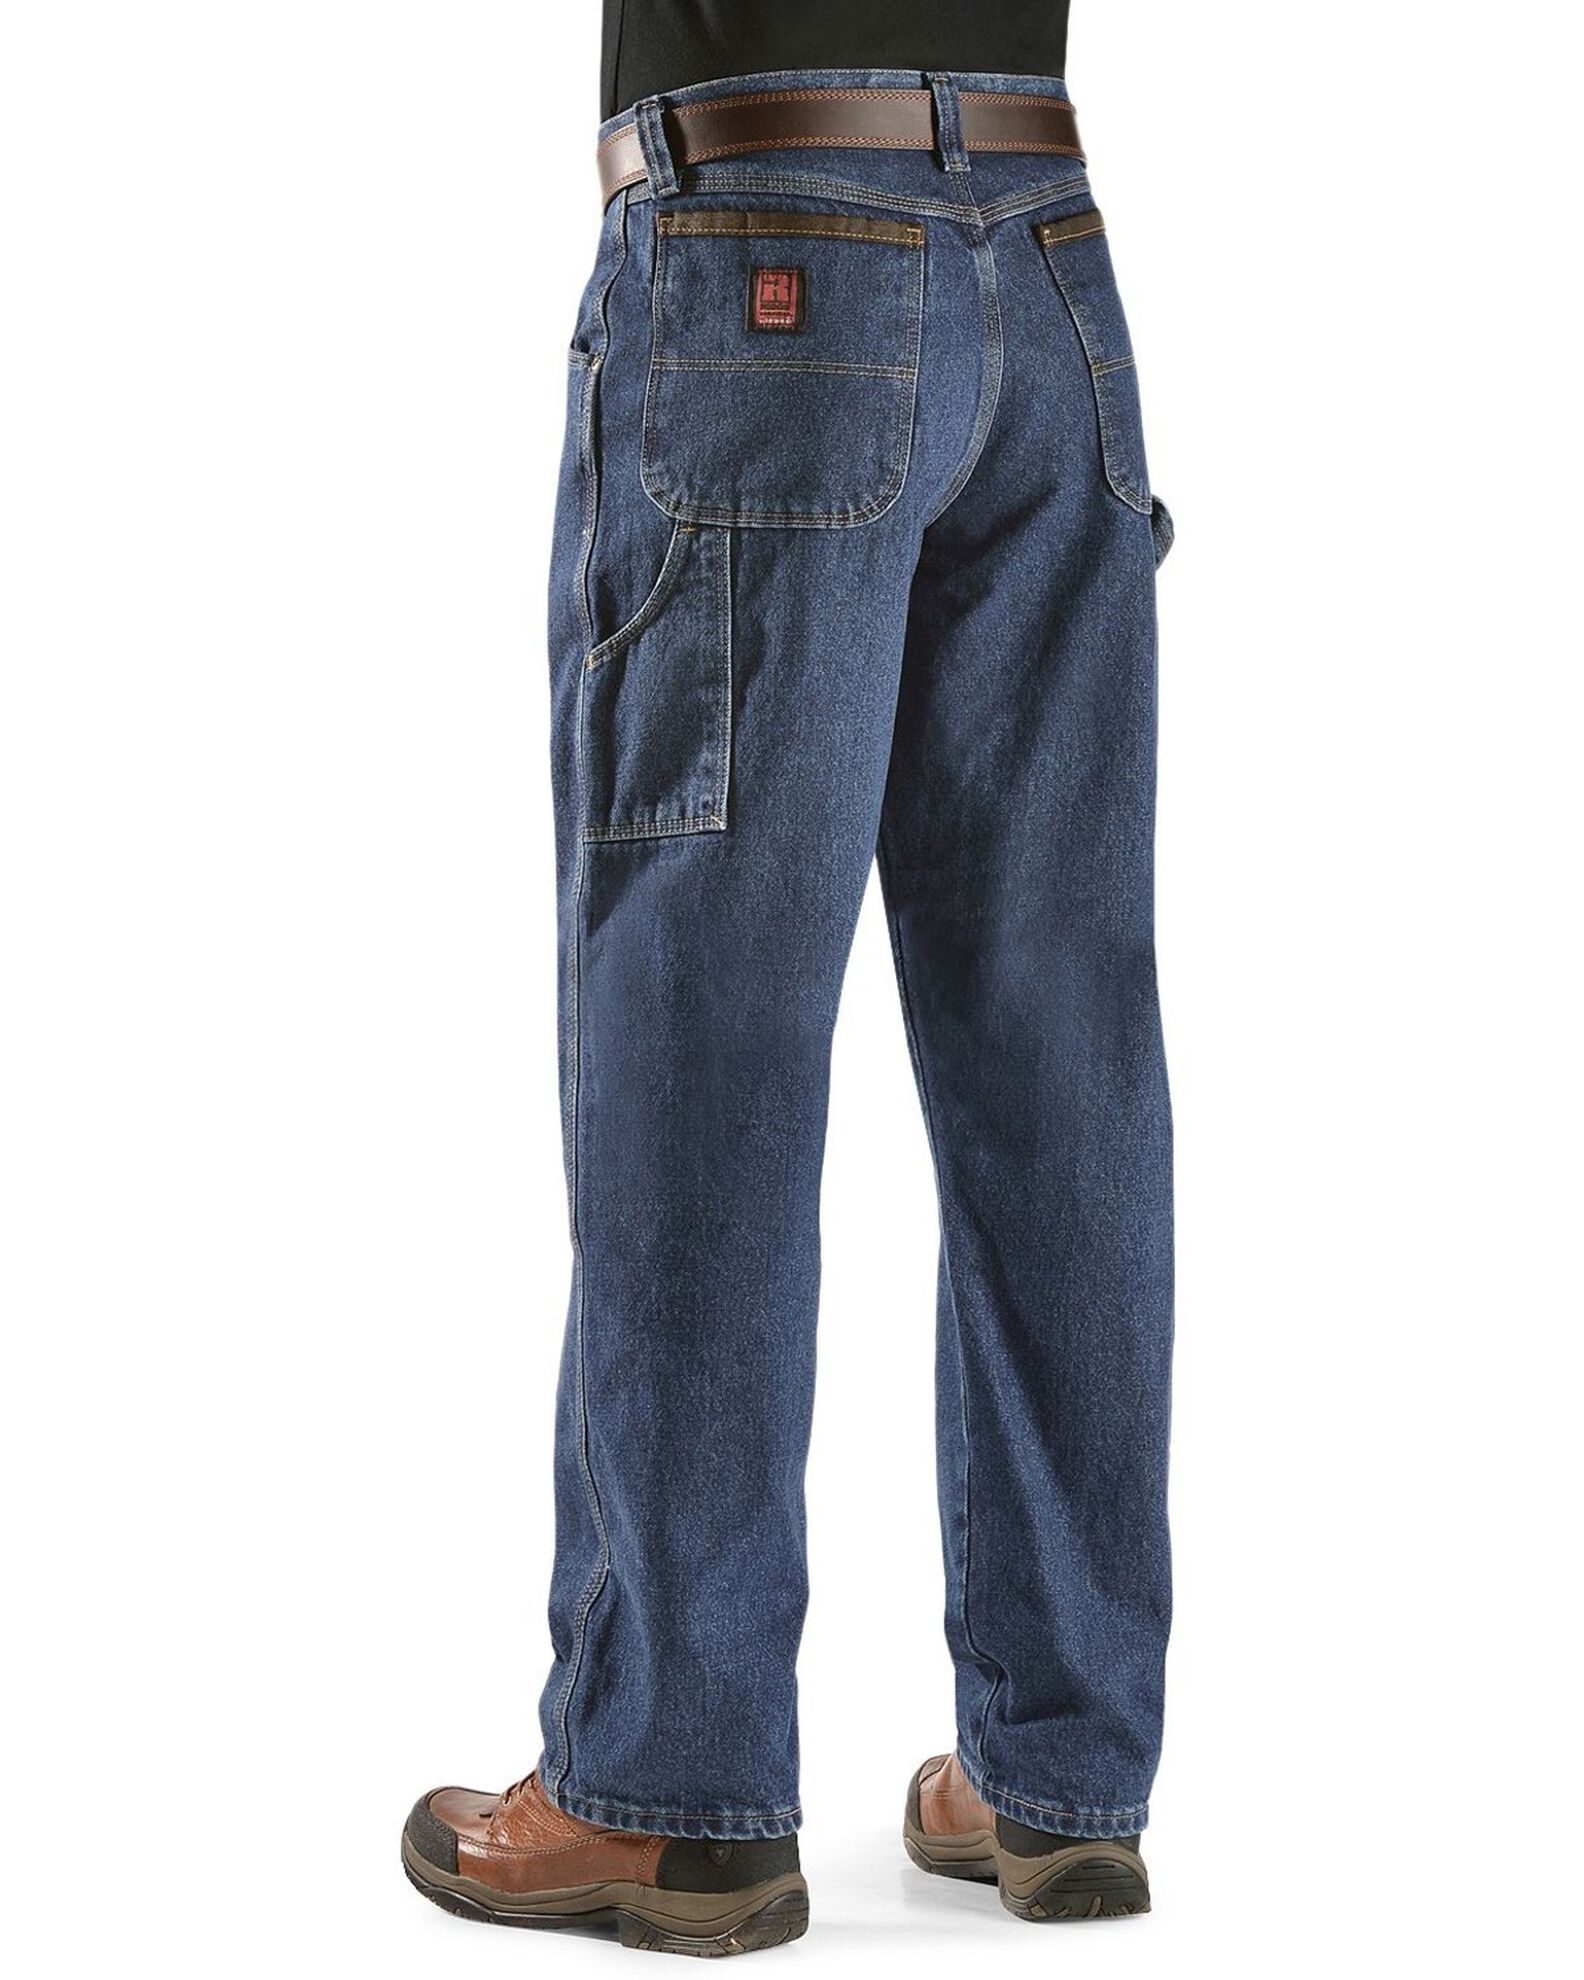 Wrangler Men's Riggs Workwear Relaxed Carpenter Jeans - Country Outfitter